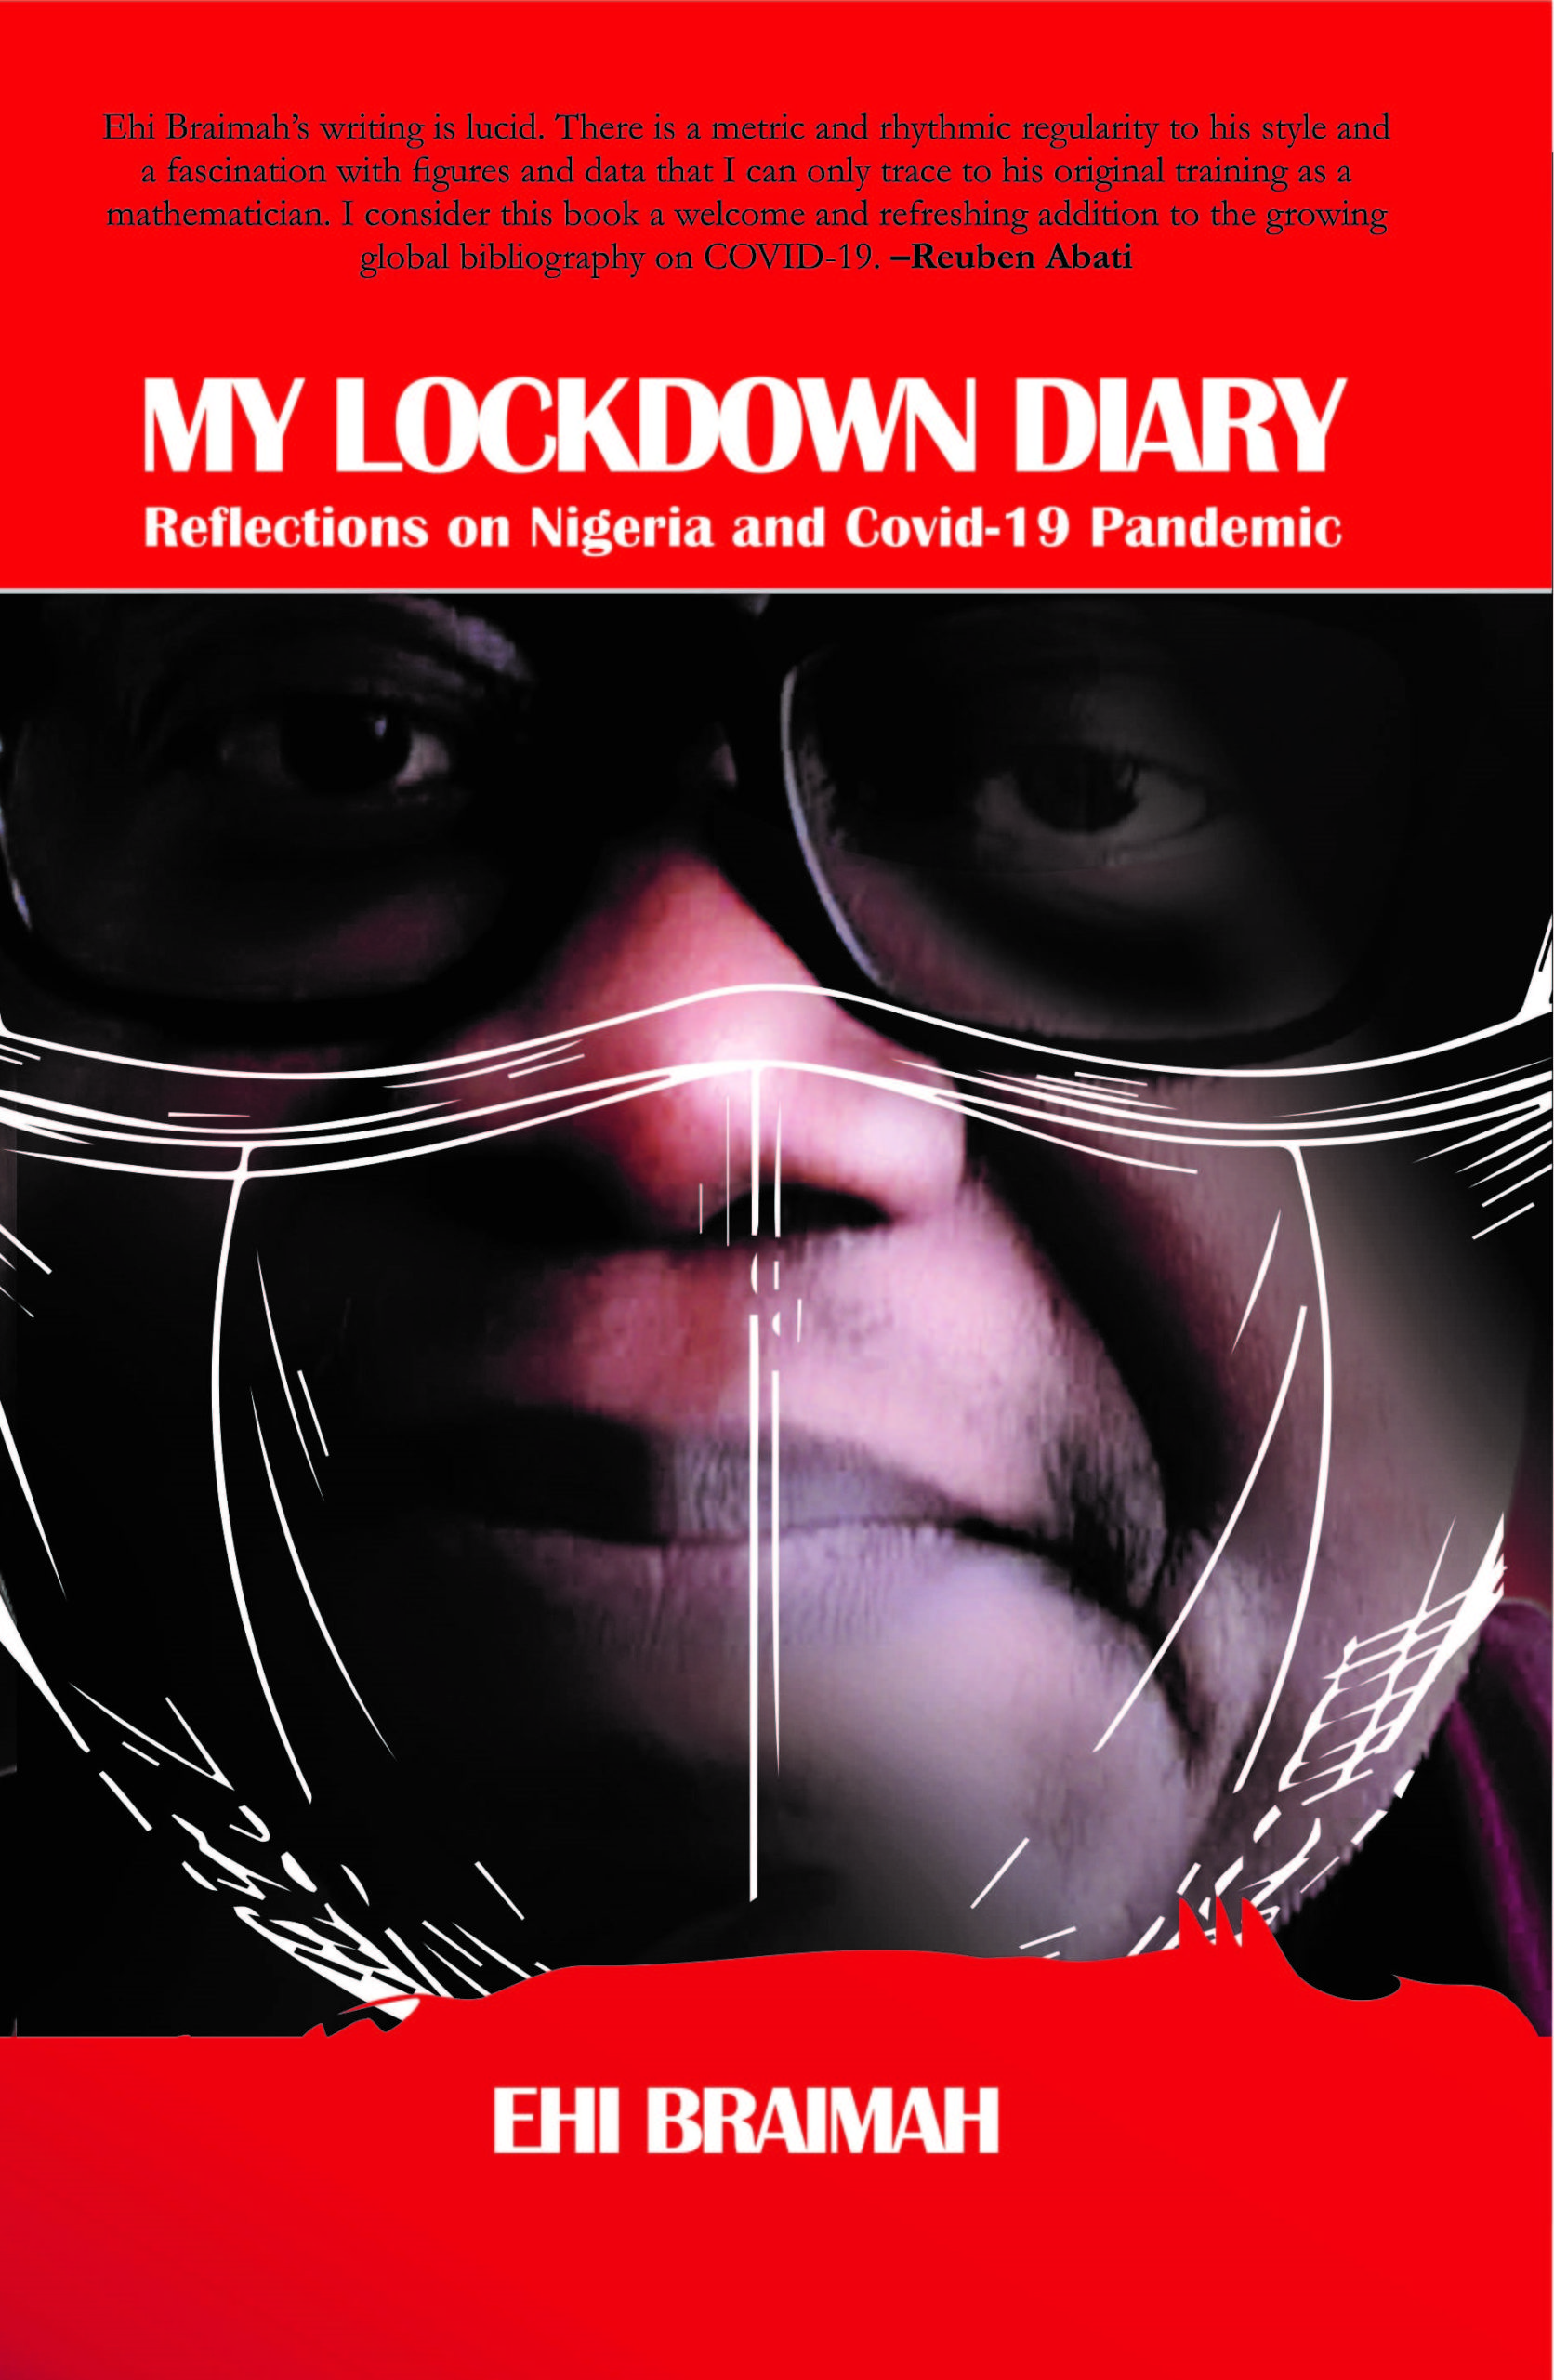 NEW RELEASE — My Lockdown Dairy – Reflections on Nigeria and Covid-19 Pandemic